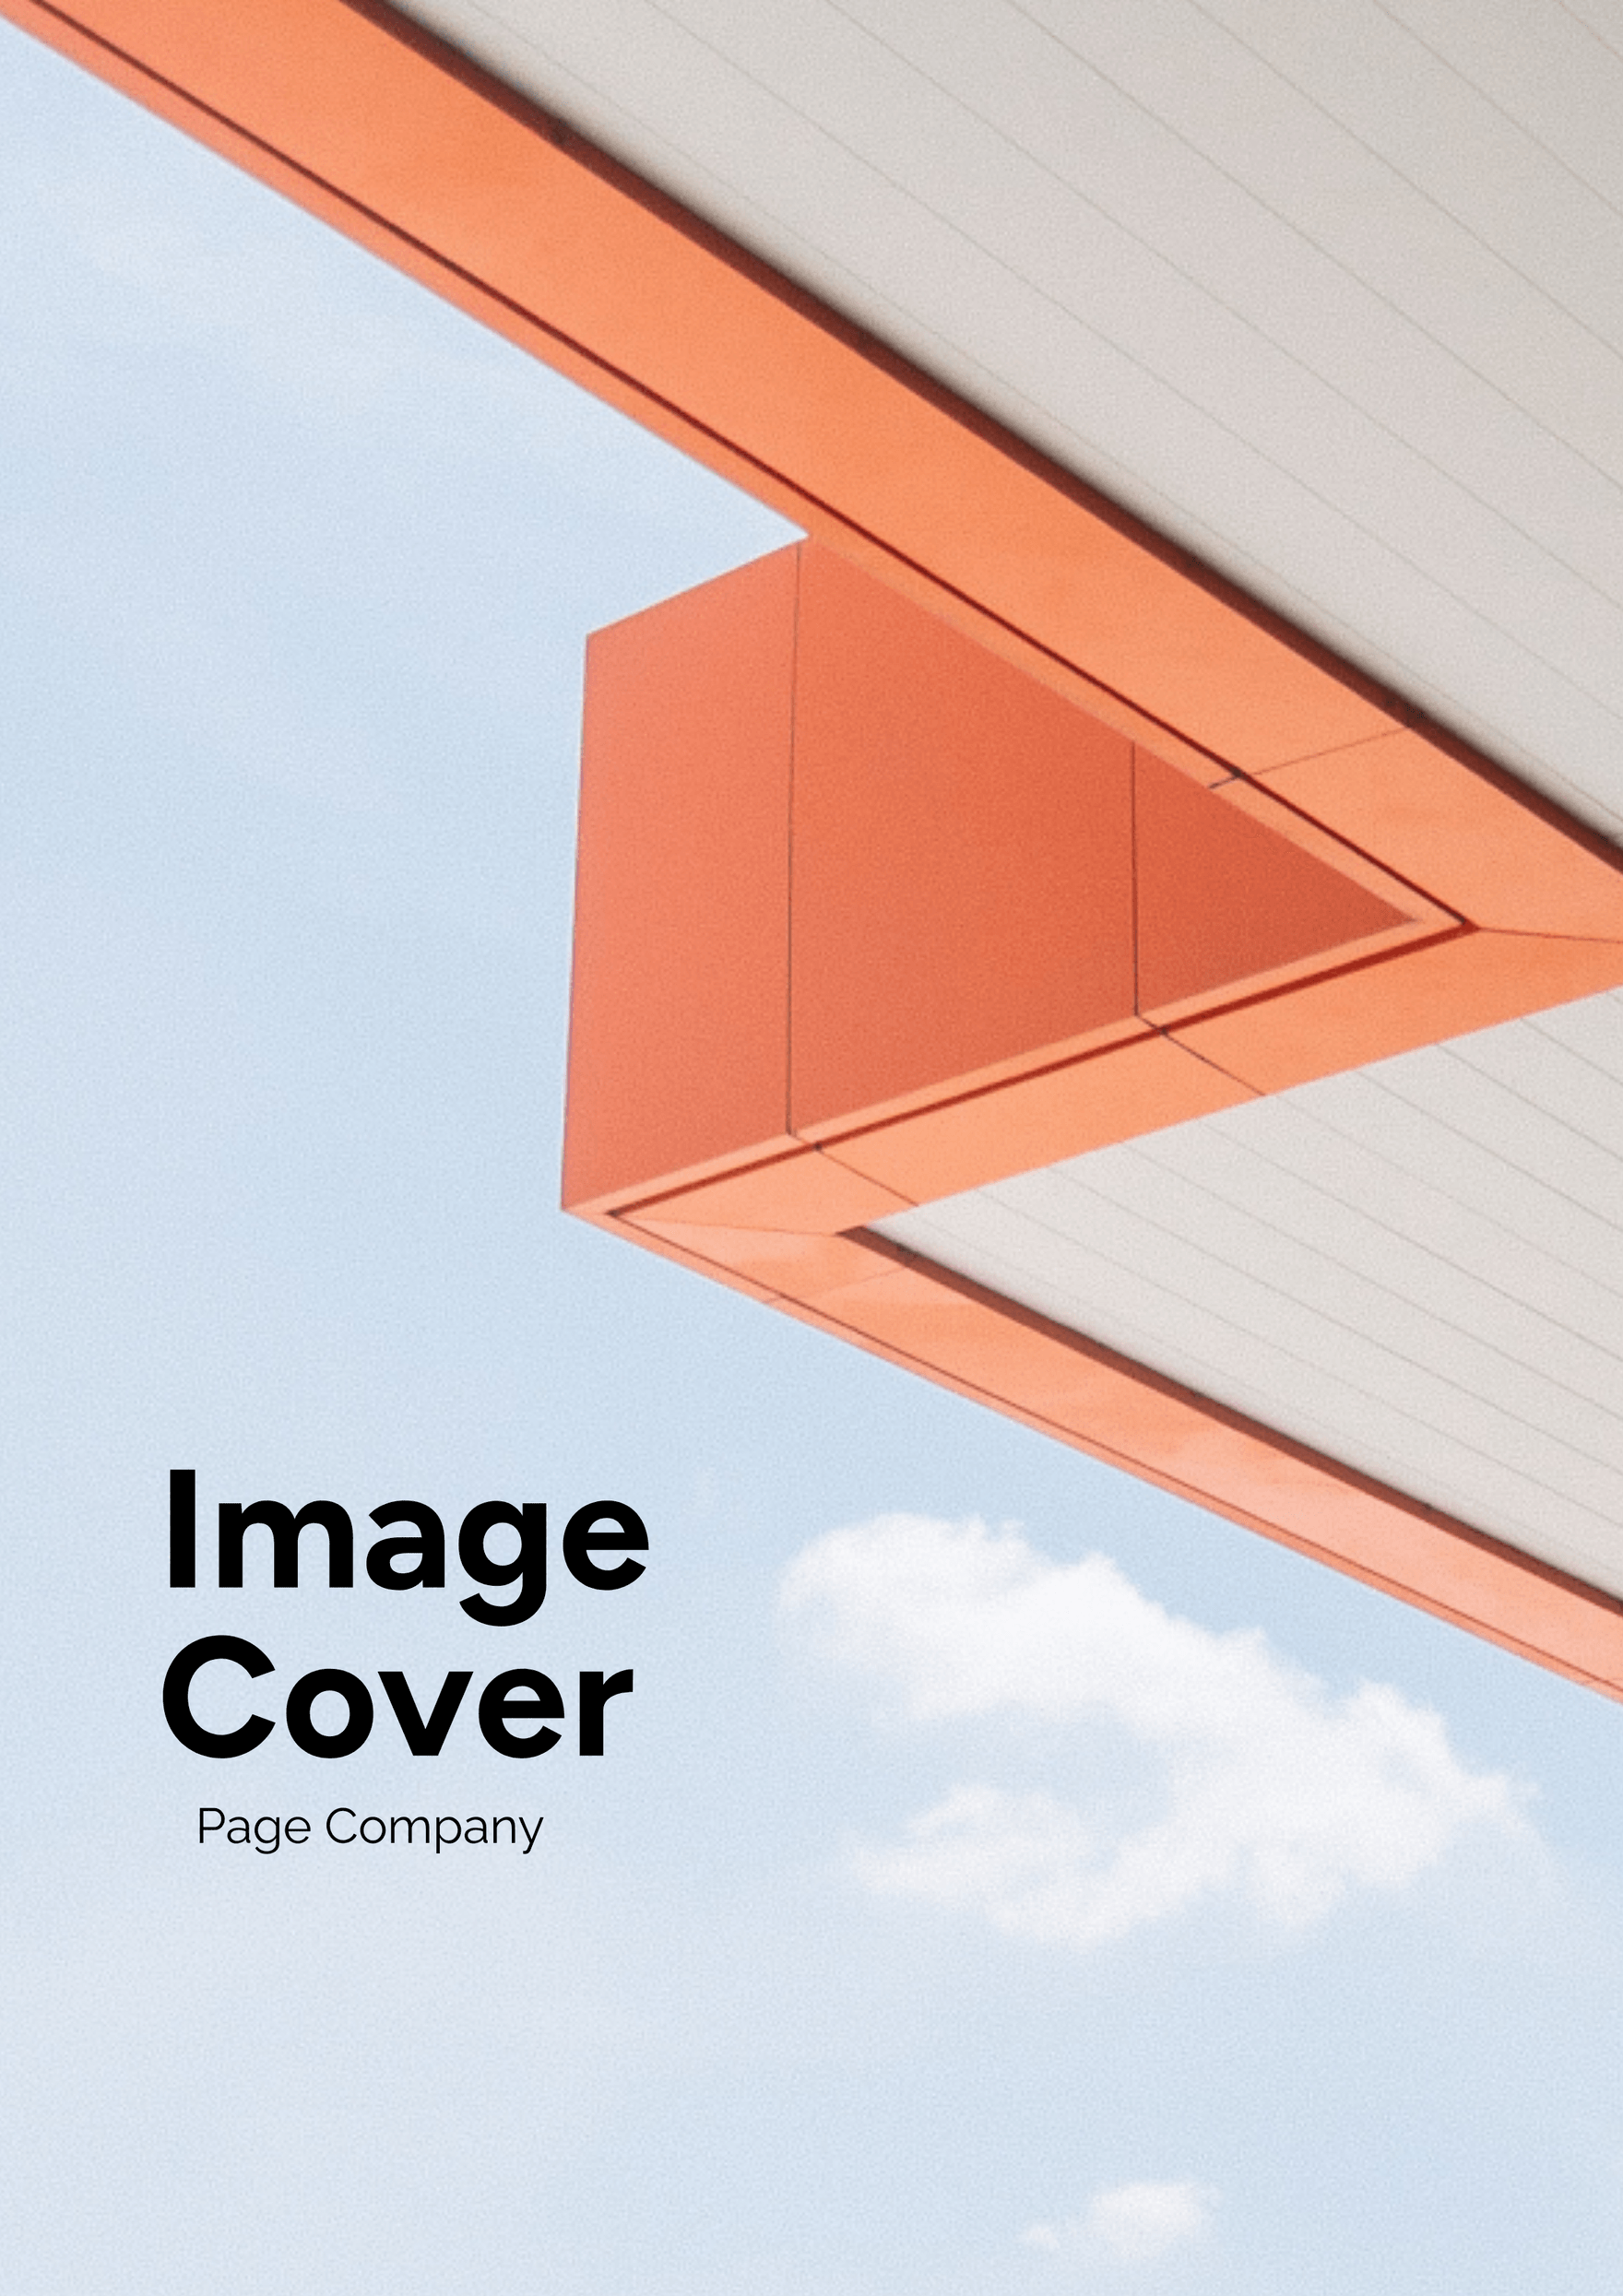 Image Cover Page Company